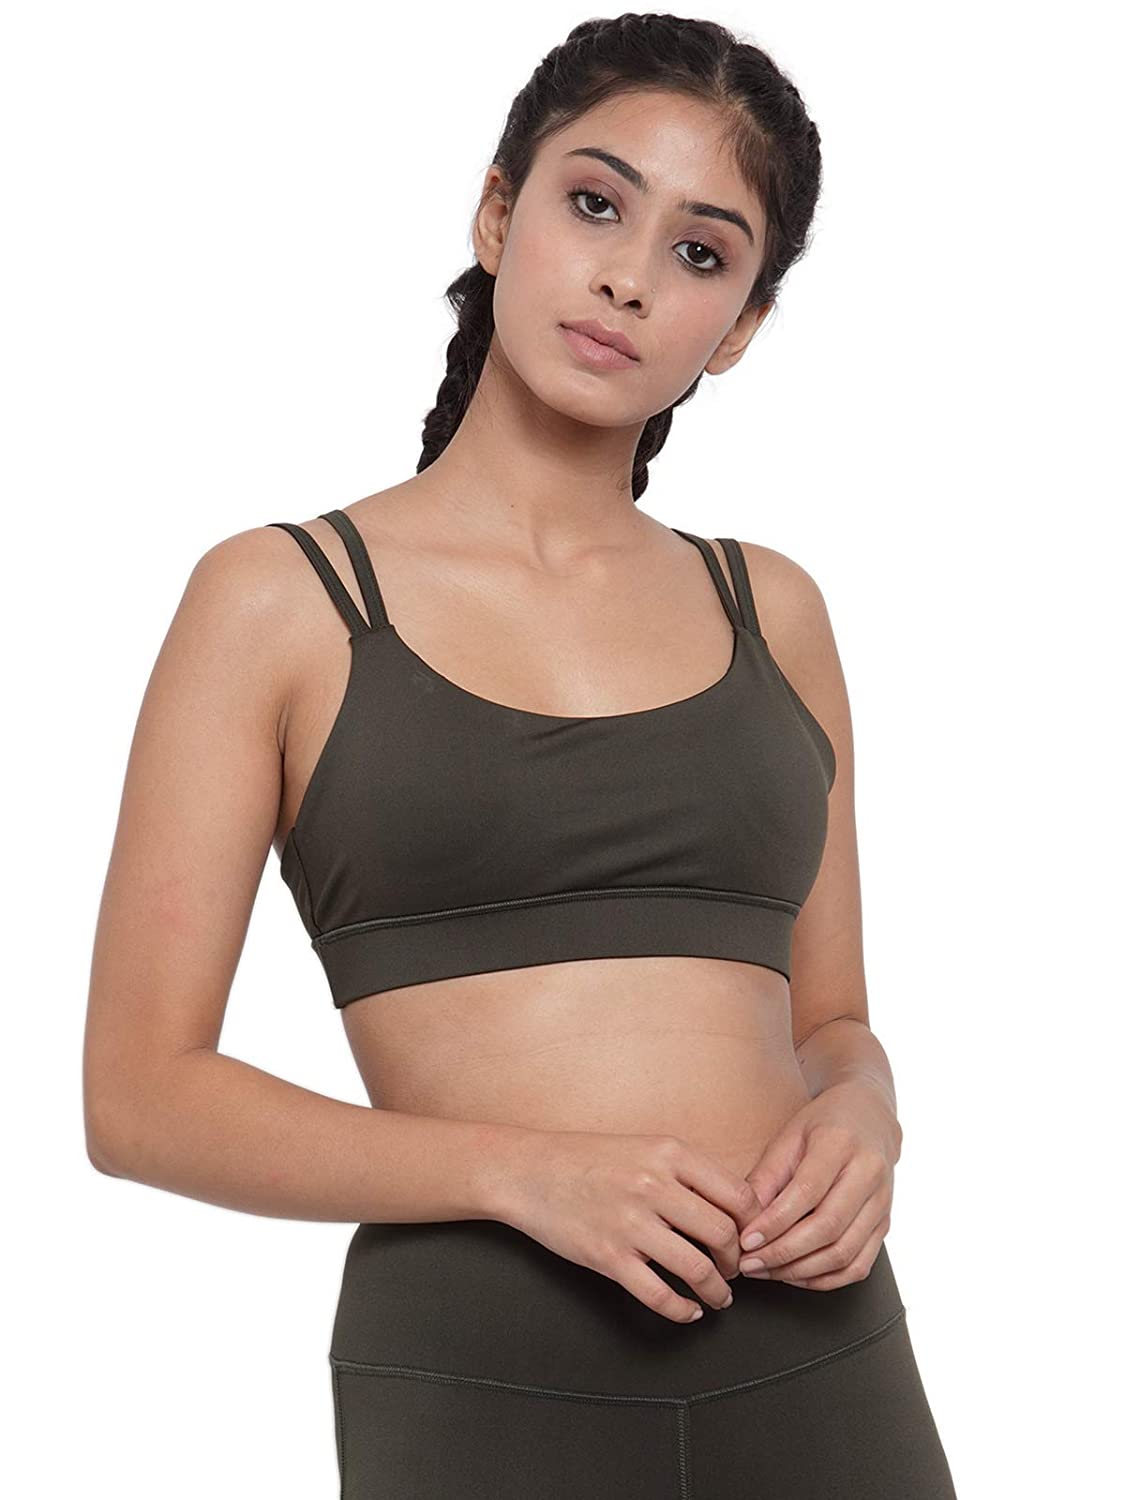 Durtebeua Bras For Women Full Coverage Workout Crop Tank Top with Built in  Bra 